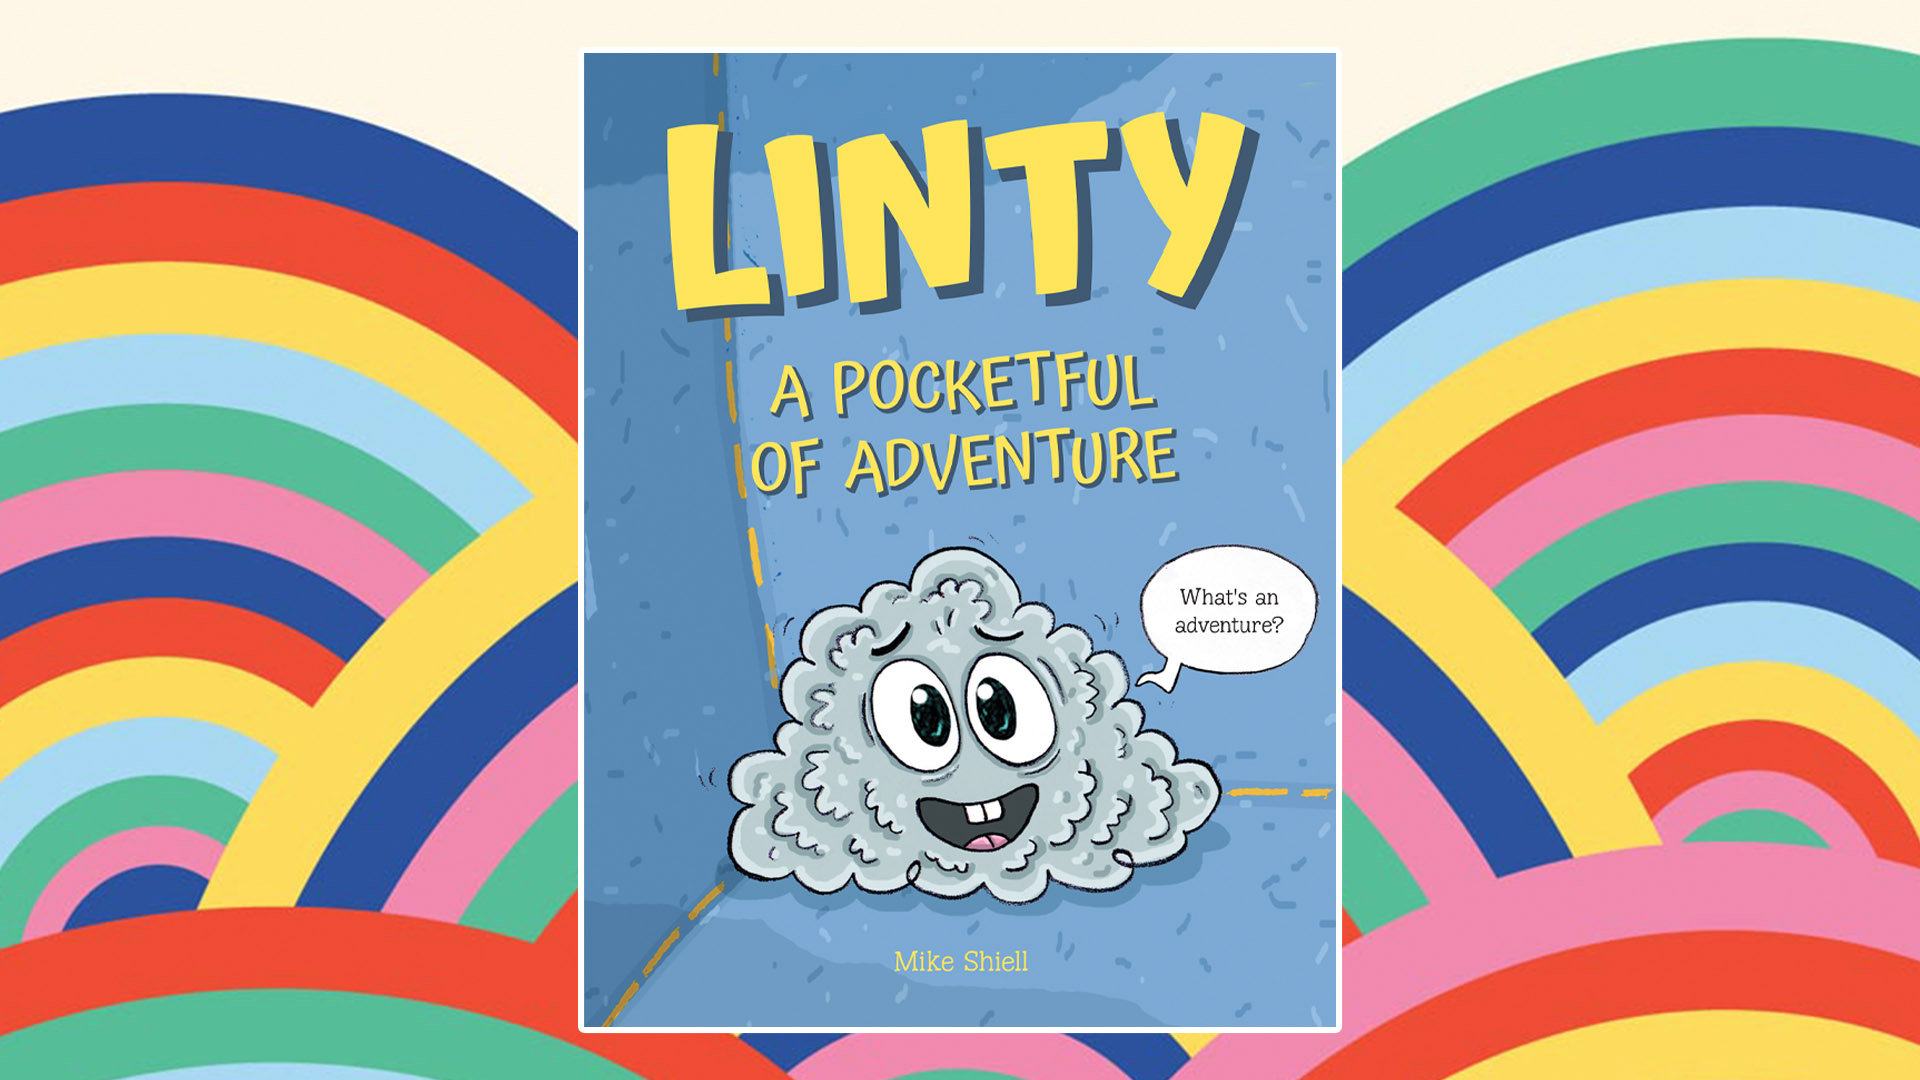 The book cover of Linty on a background with lots of rainbows